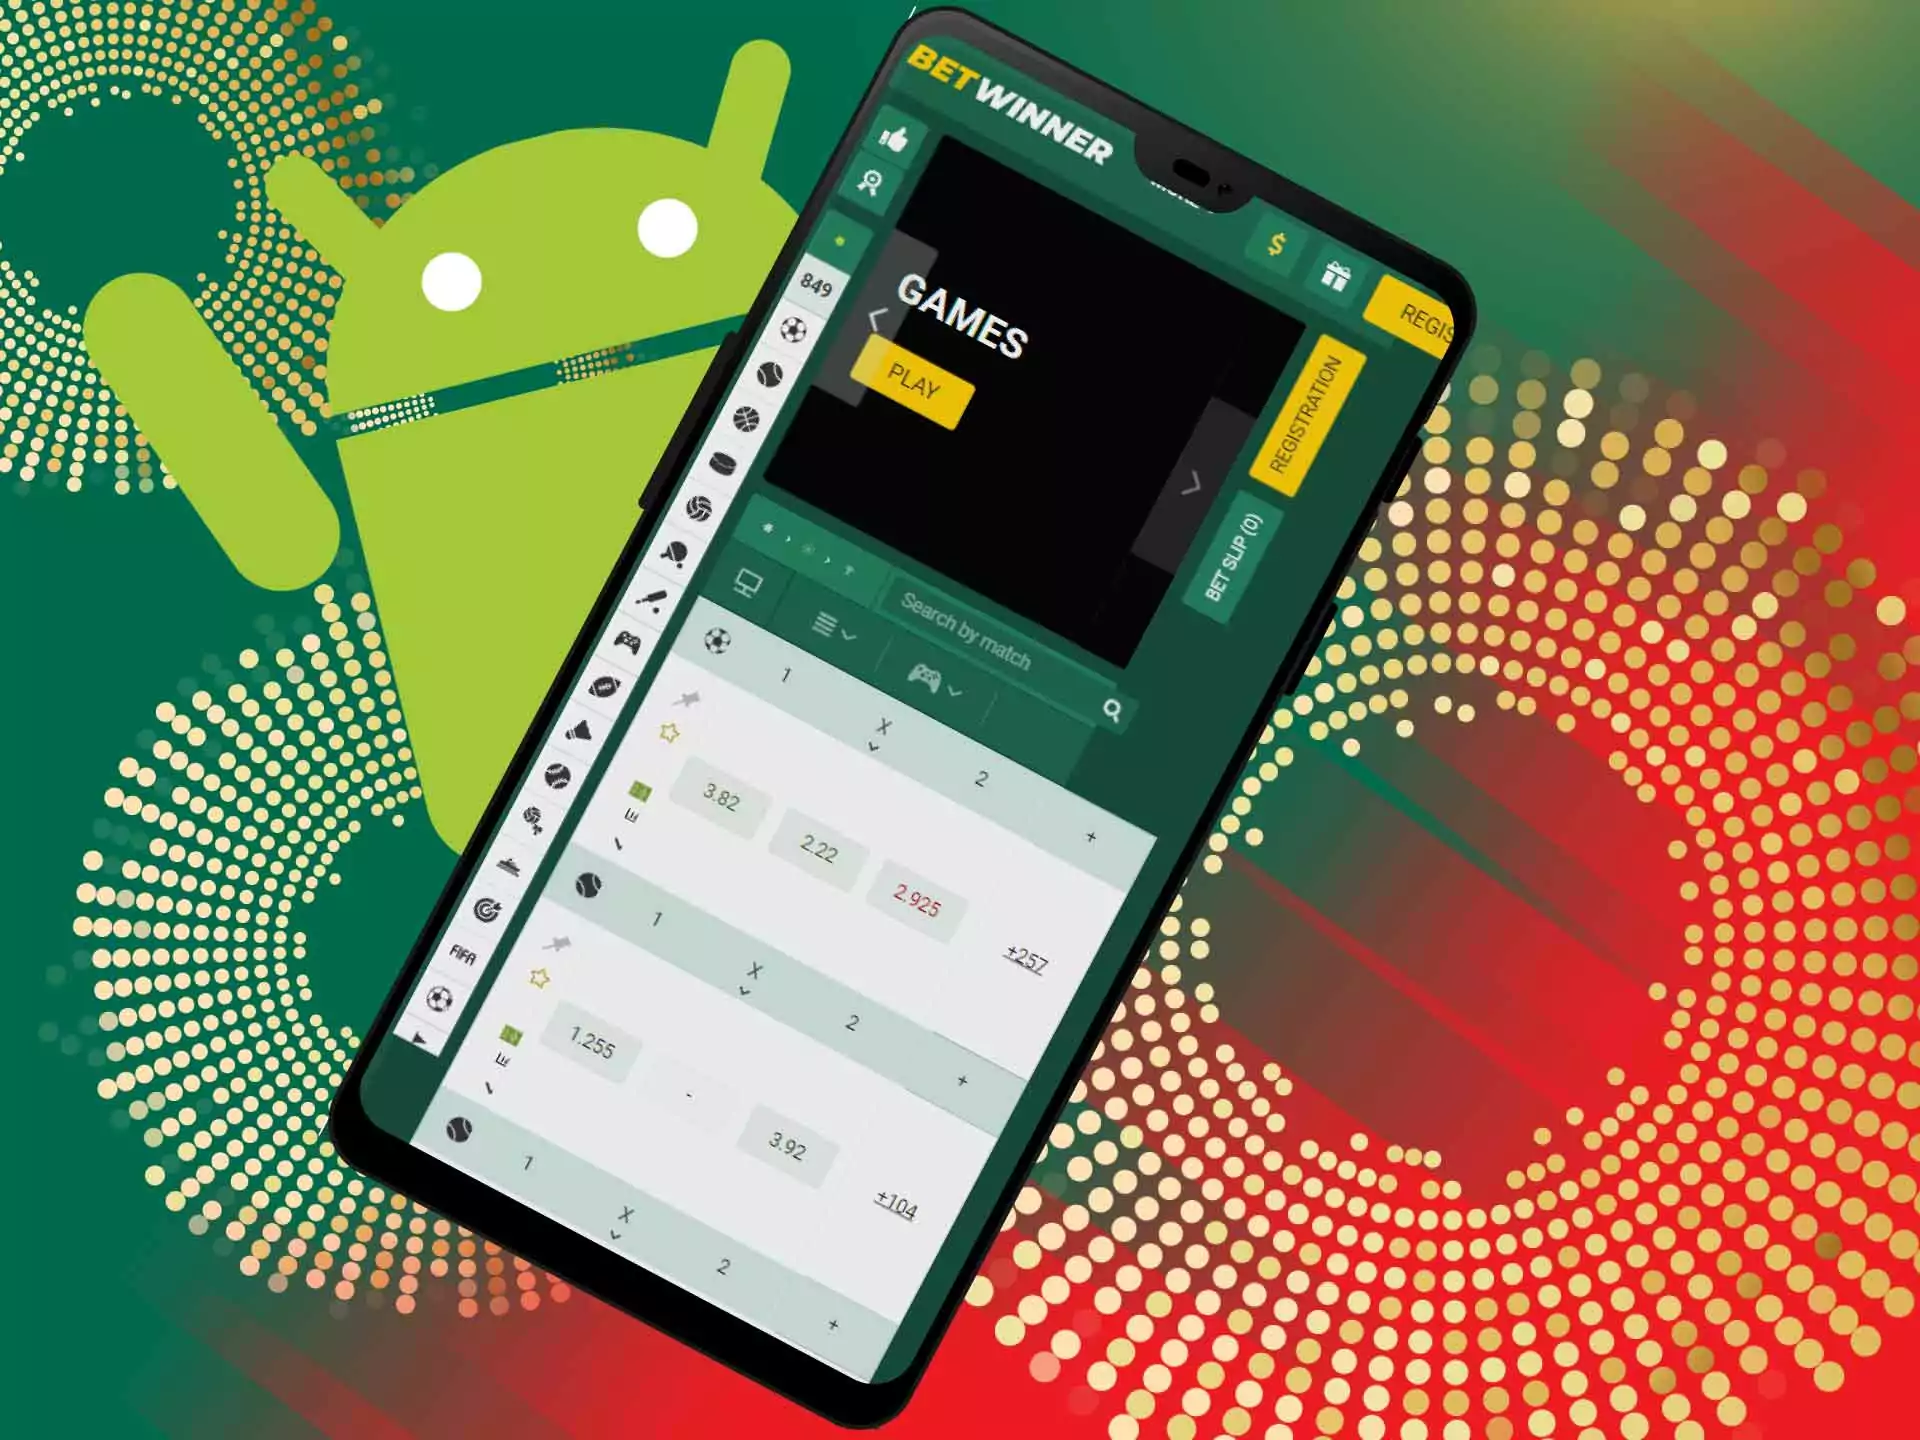 Every modern Android device can run the Betwinner app.